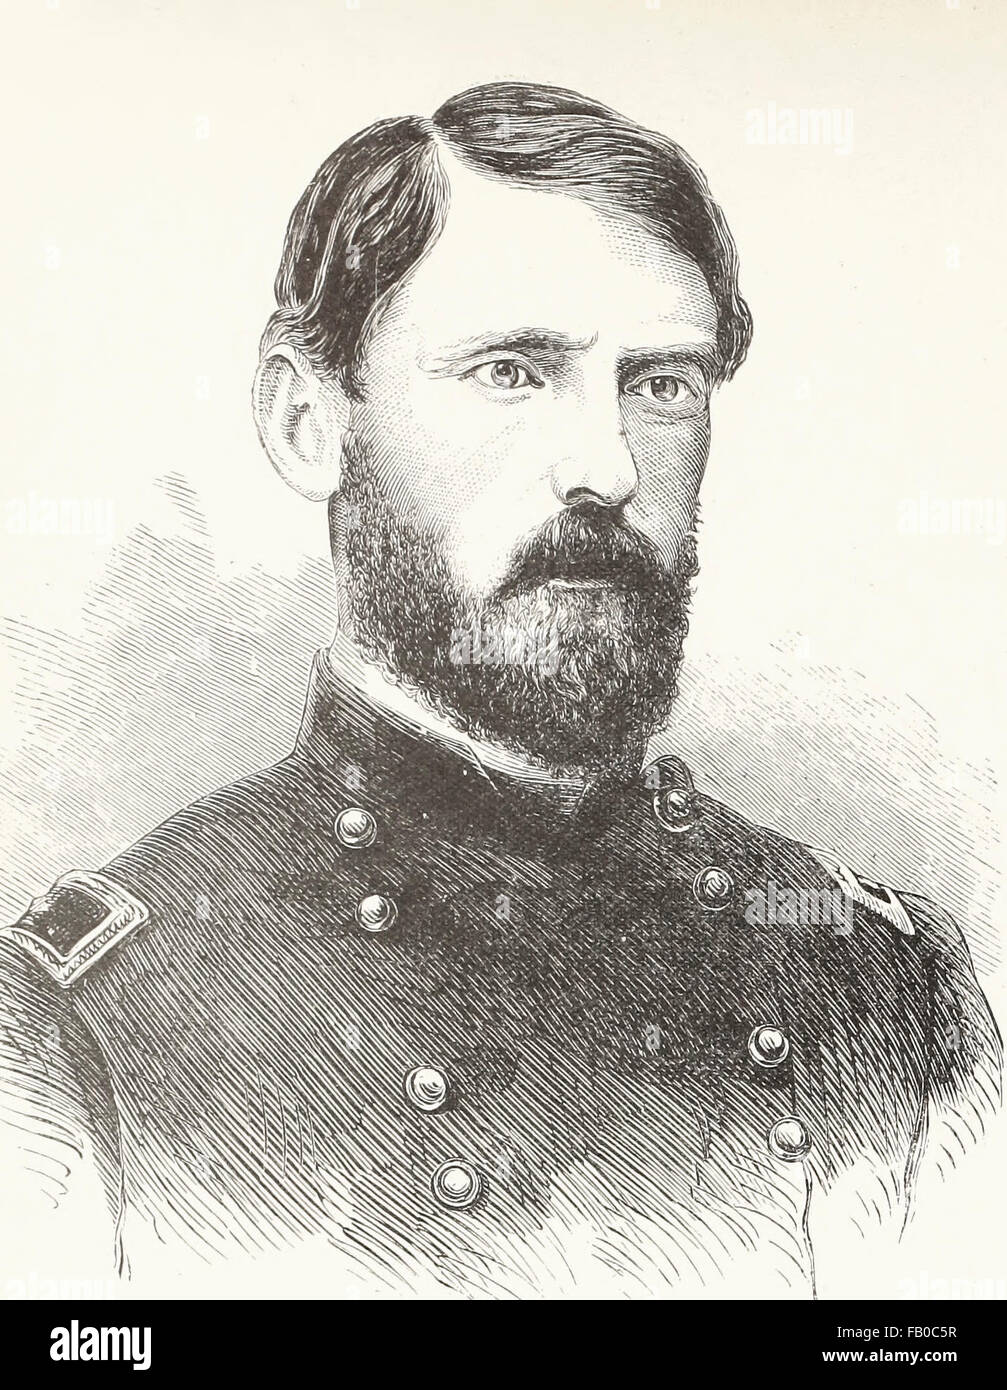 General John Fulton Reynolds was a career United States Army officer and a general in the American Civil War. One of the Union Army's most respected senior commanders, he played a key role in committing the Army of the Potomac to the Battle of Gettysburg and was killed at the start of the battle. USA Civil War Stock Photo